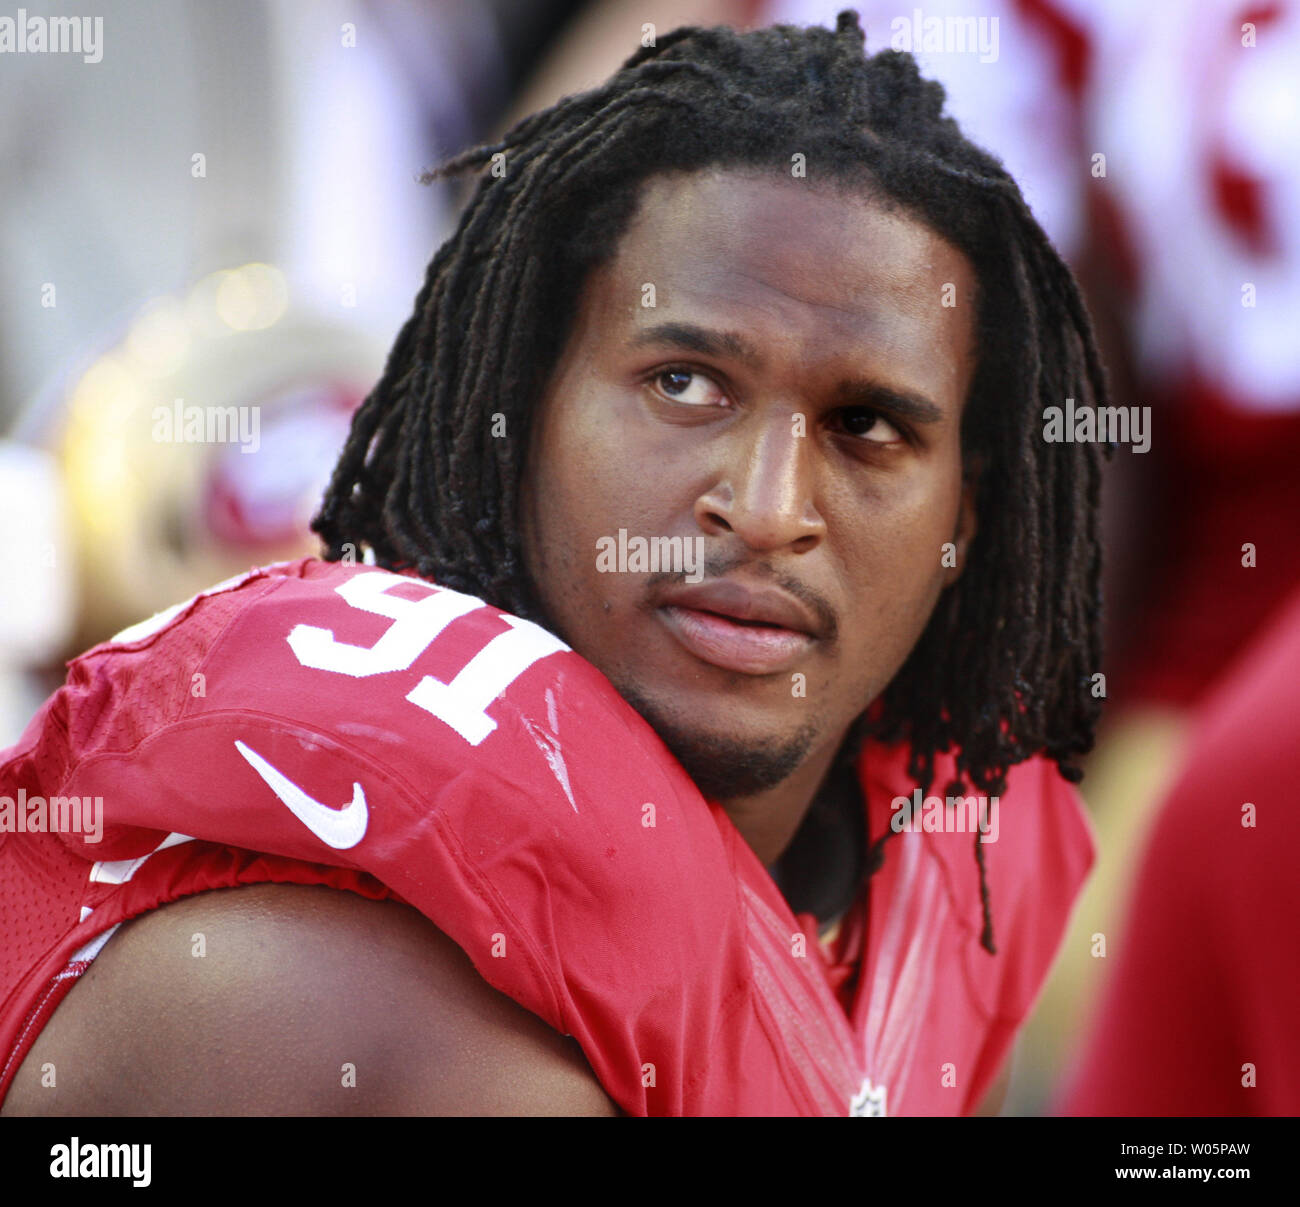 San Francisco 49ers defensive tackle Ray McDonald waits to play the Chicago Bears at Levi's Stadium in Santa Clara, California on September 14, 2014. California Lieutenant Governor and former San Francisco Mayor Gavin Newsome has called on the 49ers to bench McDonald pending the outcome of his felony domestic violence investigation by San Jose law enforcement.  UPI/Bruce Gordon Stock Photo